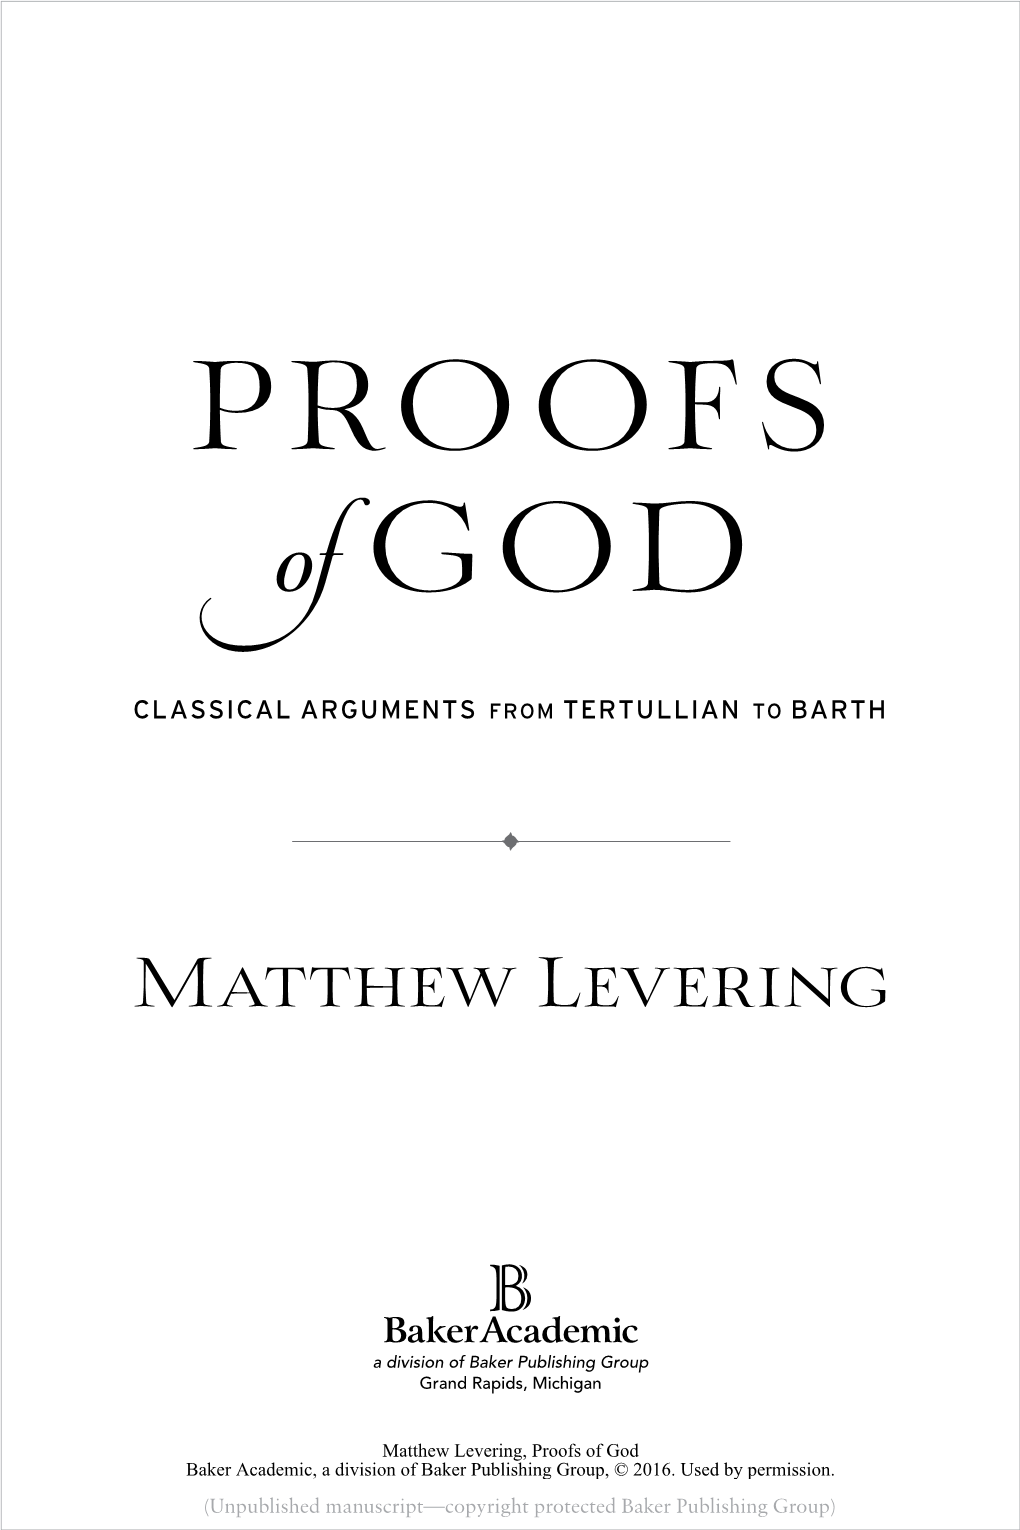 PROOFS of GOD